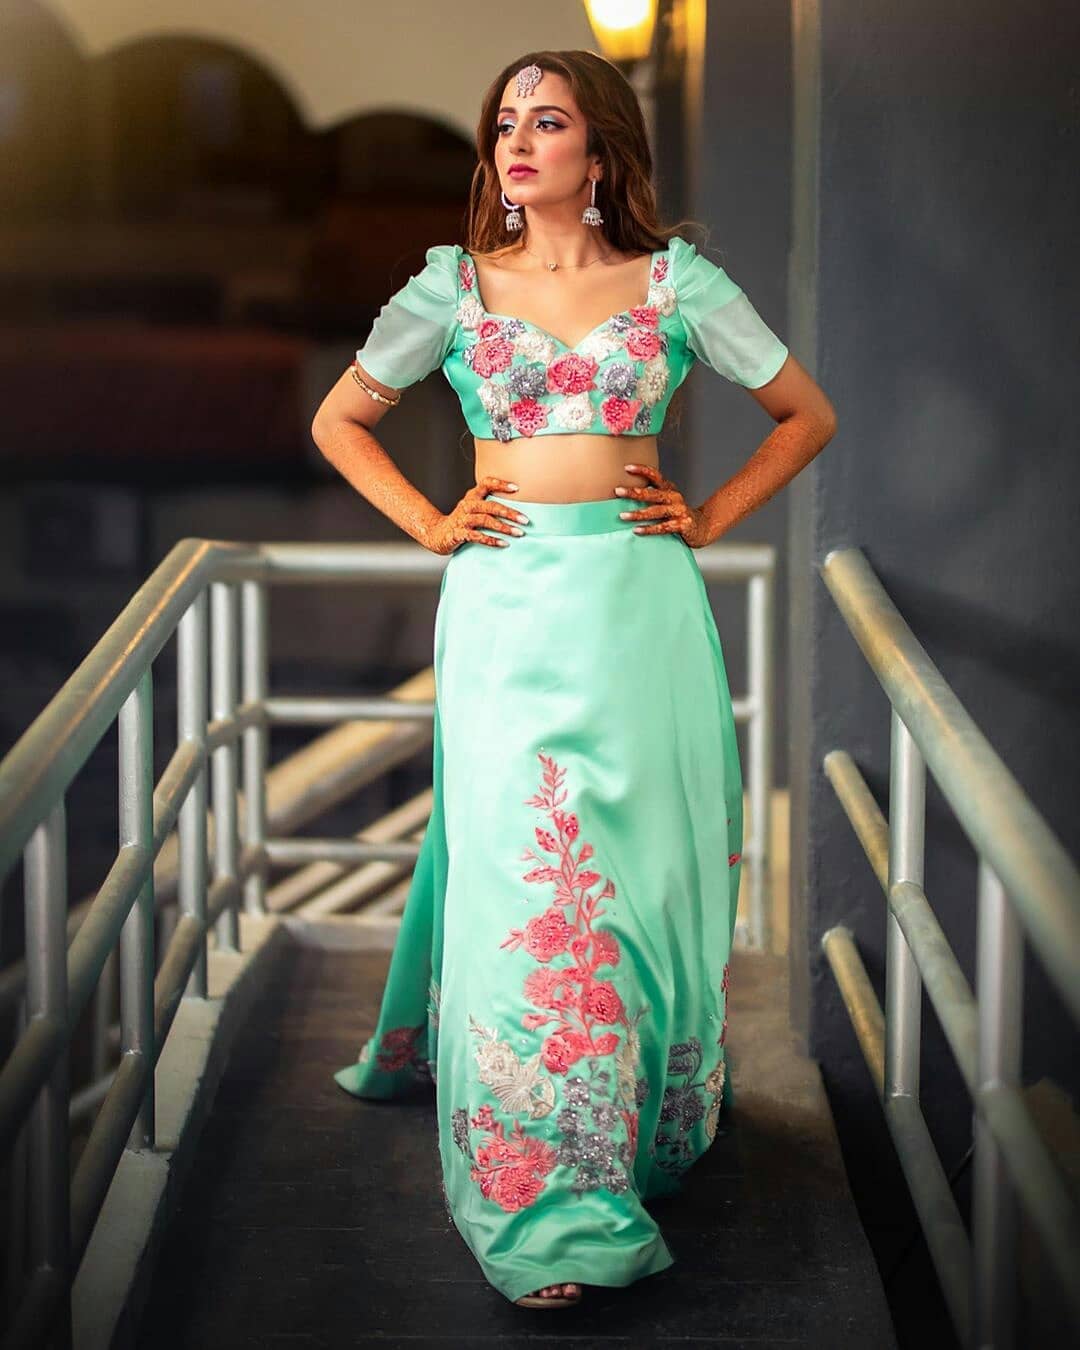 The Floral Cocktail Lehenga